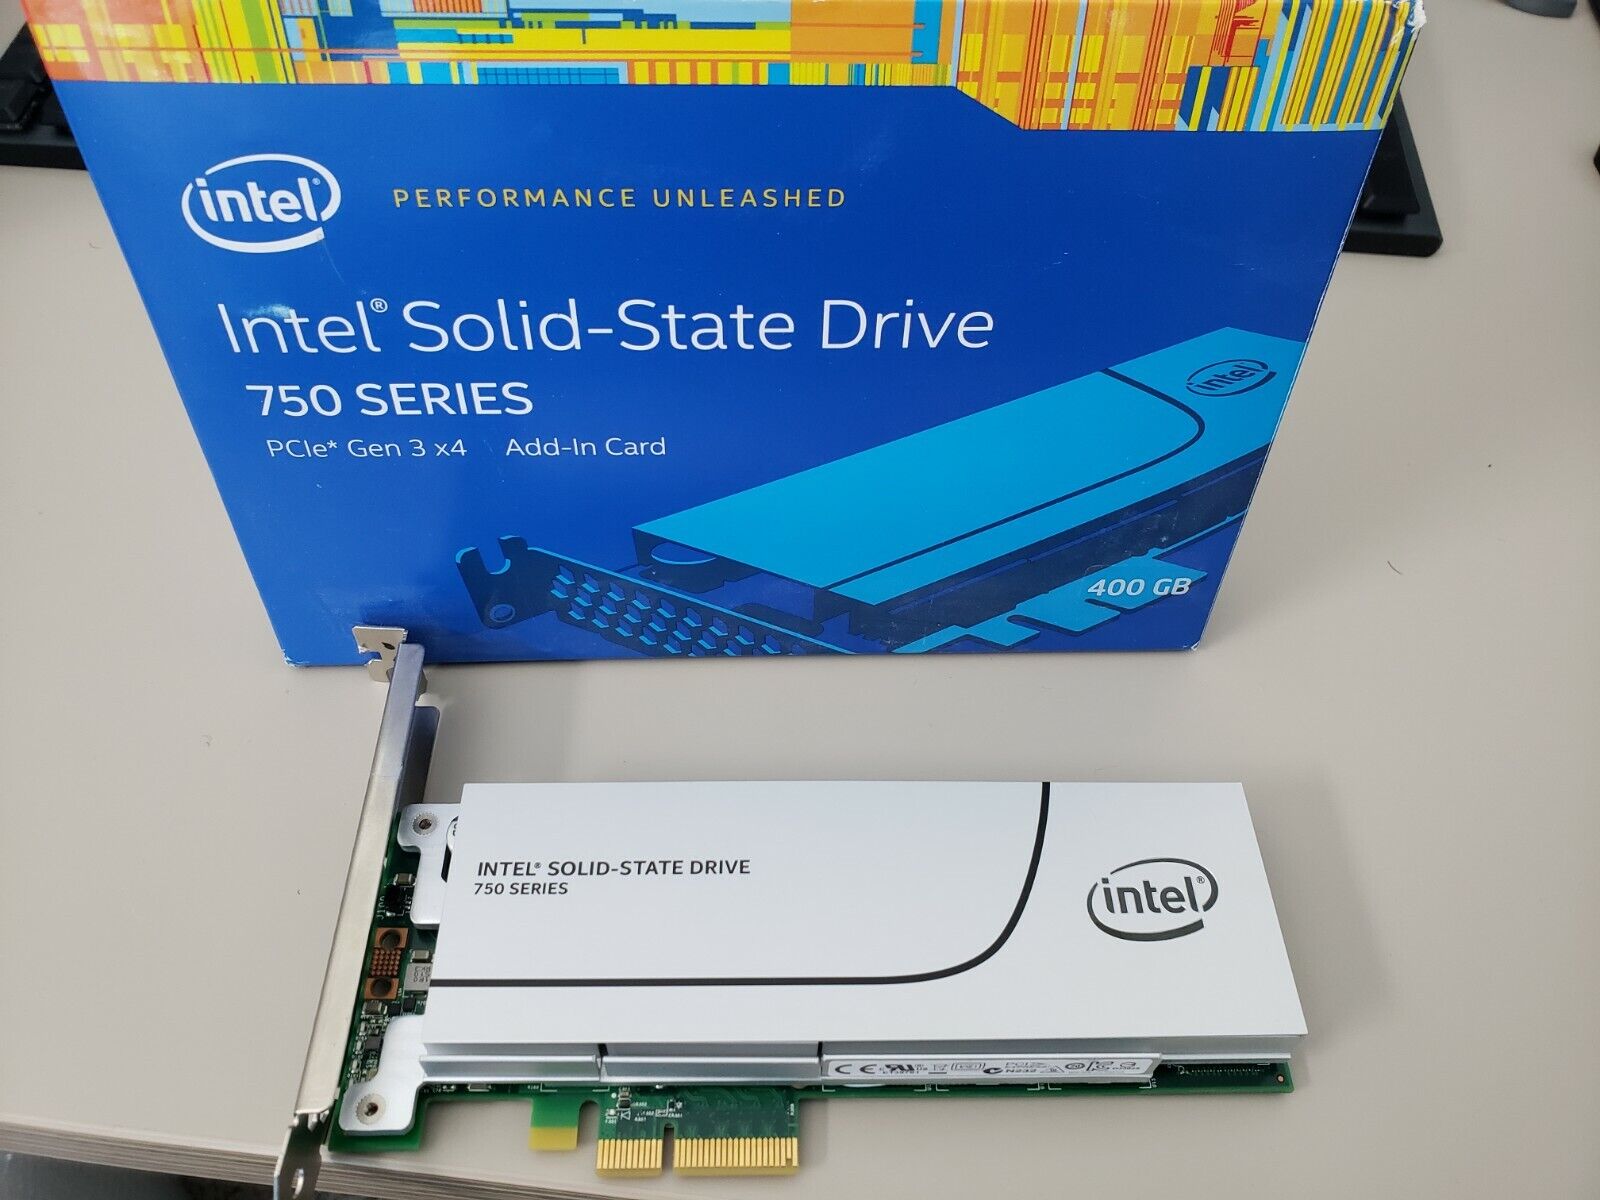 Barely used Intel Solid-State Drive 750 Series 400GB in original box